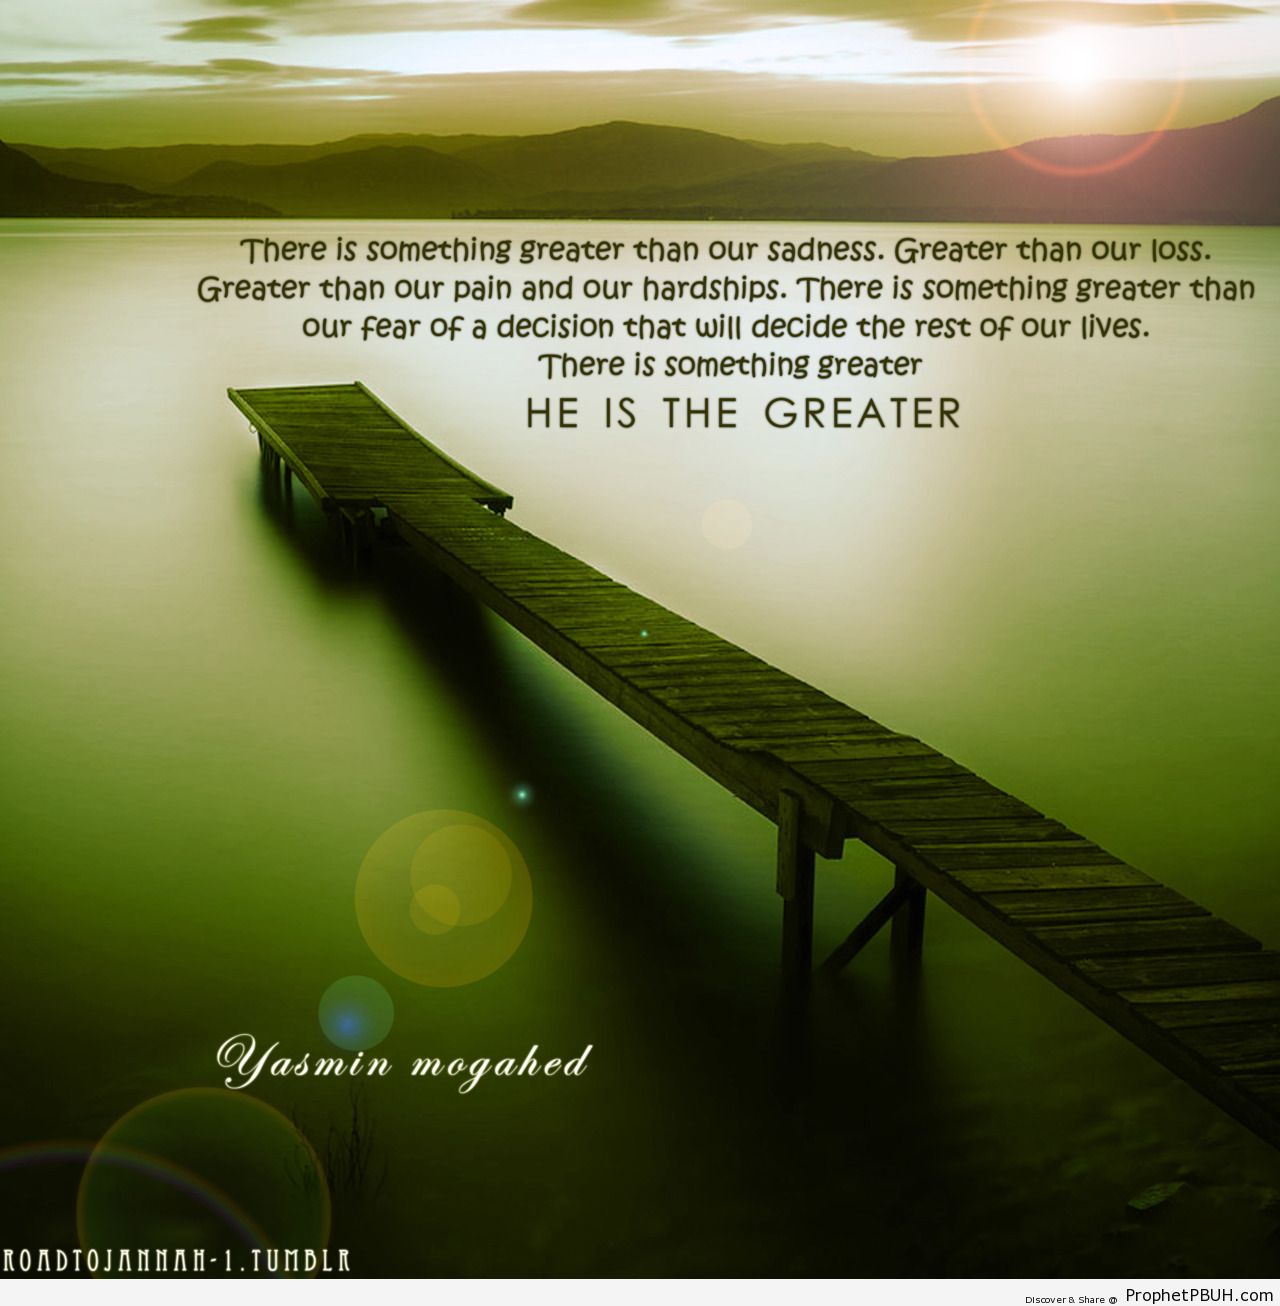 He is the Greatest - Islamic Quotes, Hadiths, Duas-001